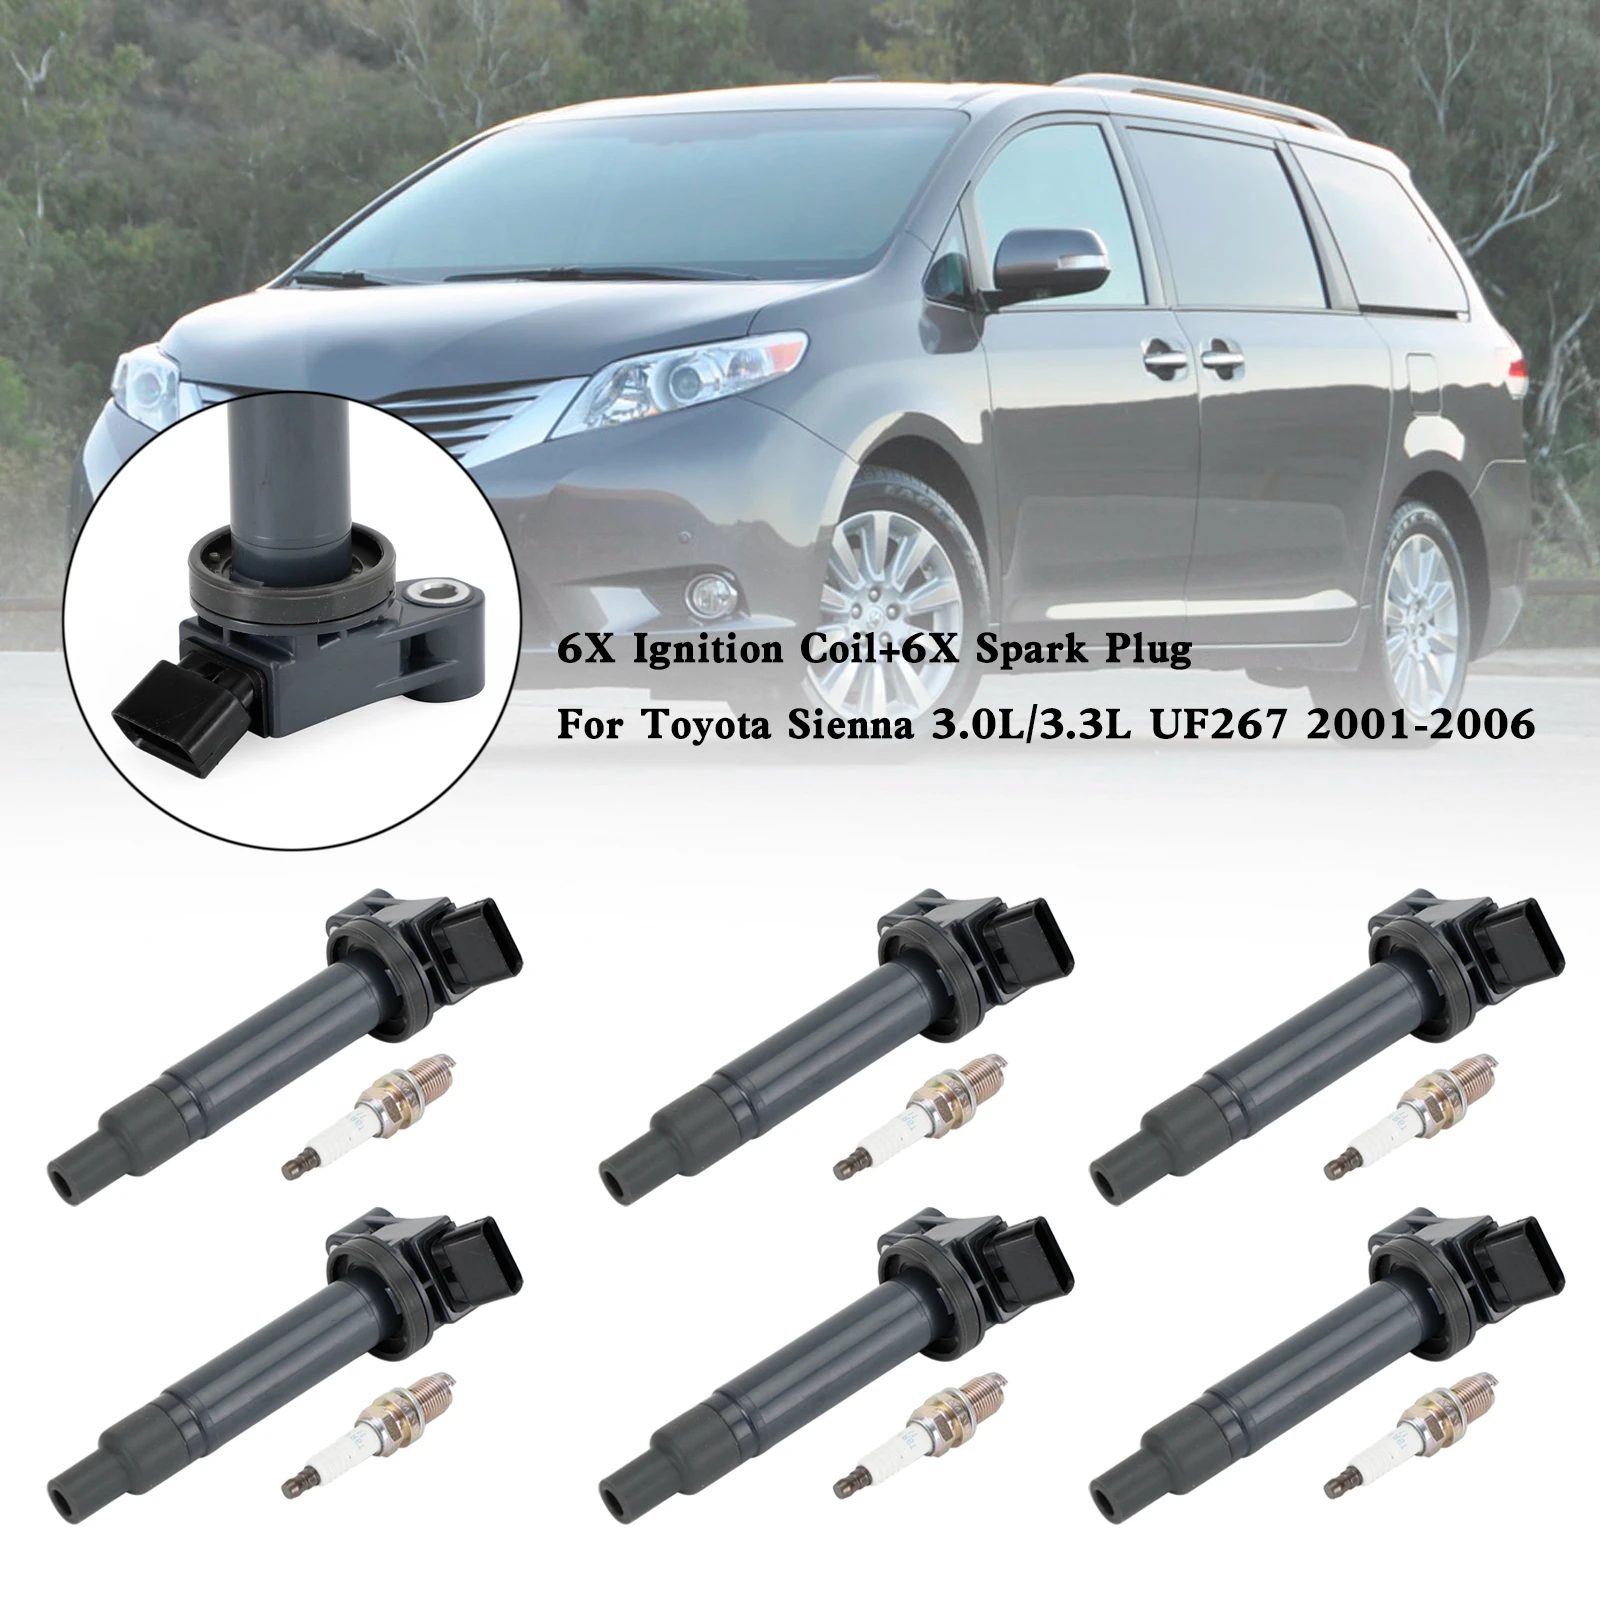 

Areyourshop 6X Ignition Coil+6X Spark Plug For Toyota Sienna 3.0L/3.3L UF267 2001-2006 Car Accessories Parts